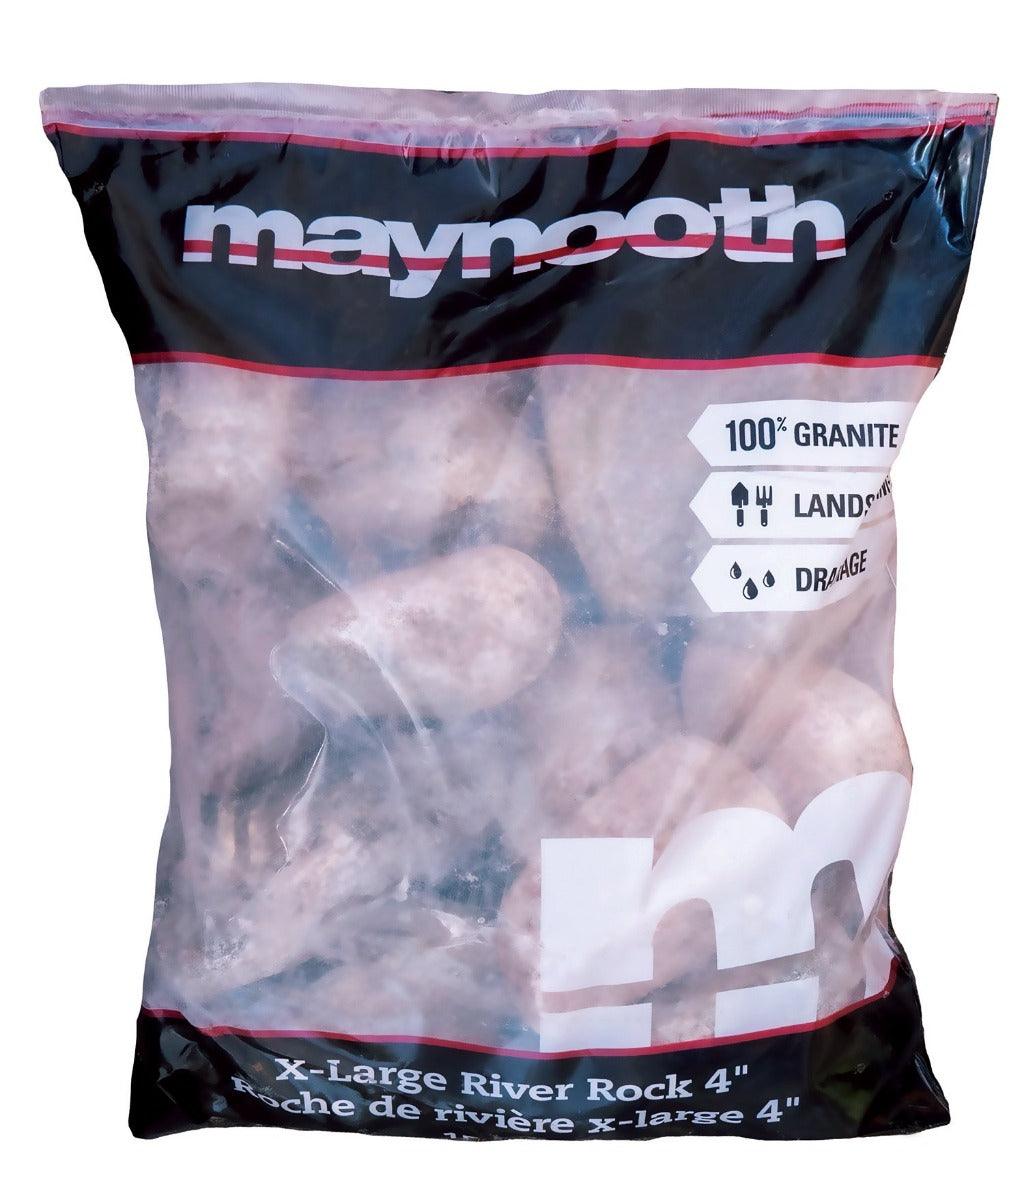 Maynooth Bagged Granite Extra Large